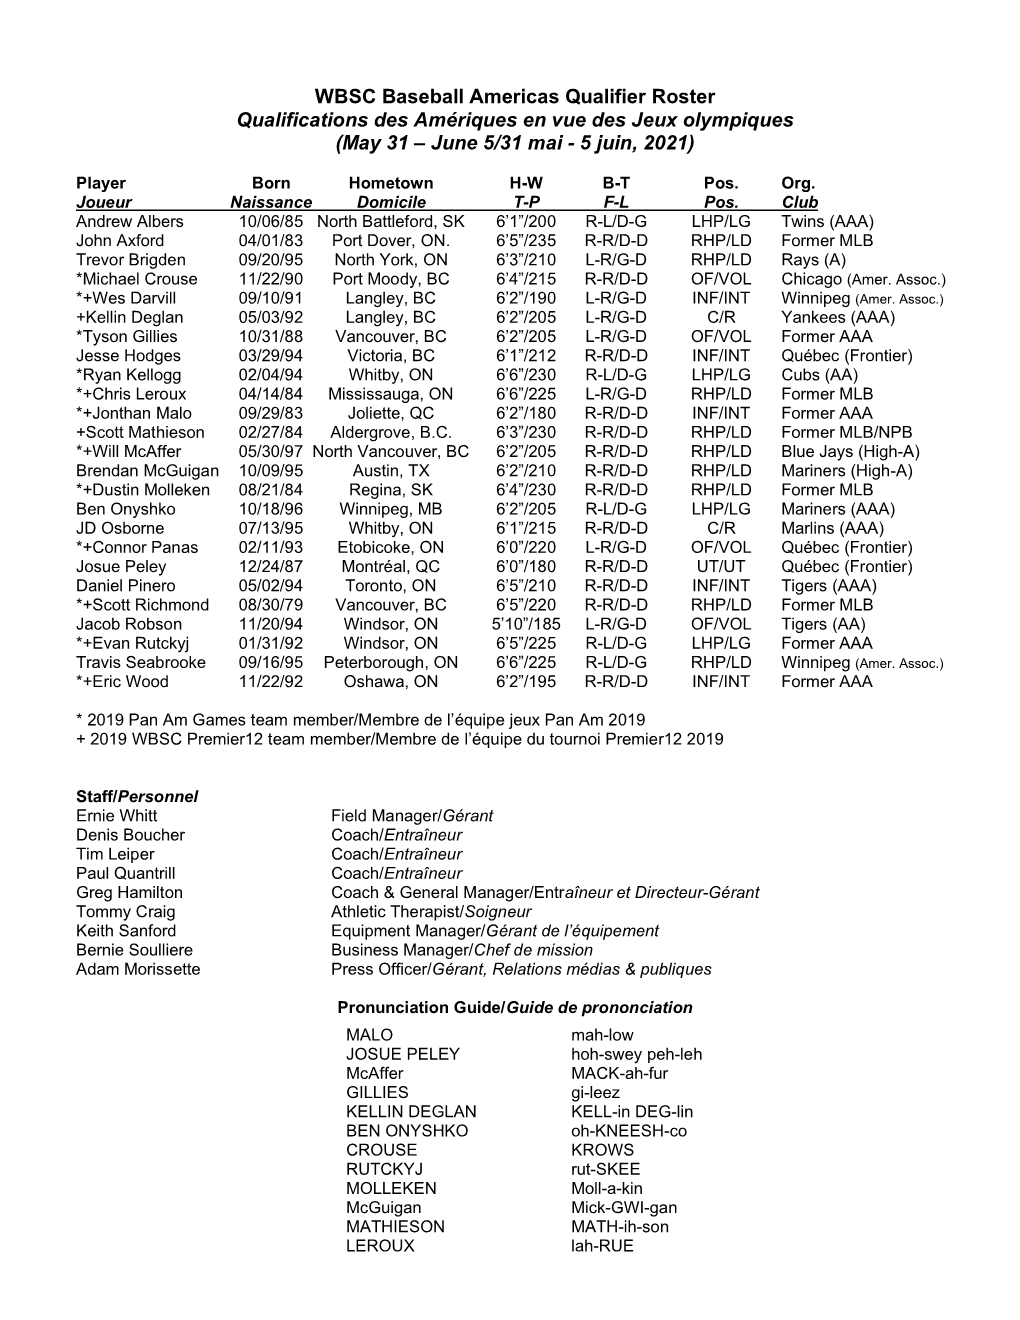 CANADA Roster